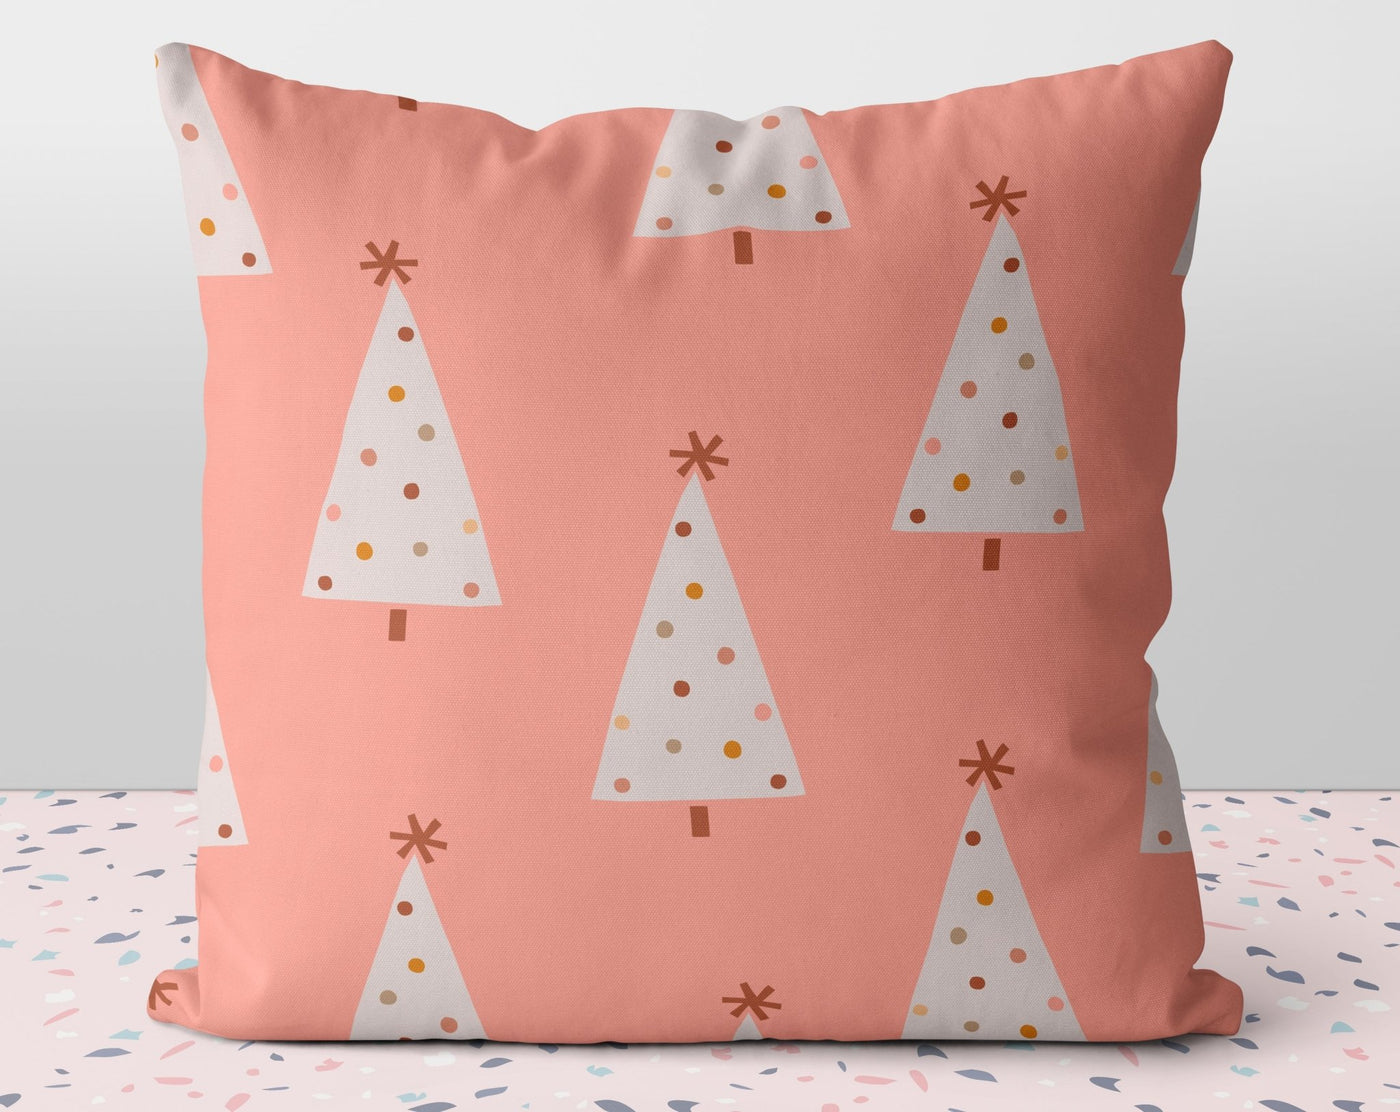 Festive Trees Pink Pillow Throw Cover with Insert - Cush Potato Pillows